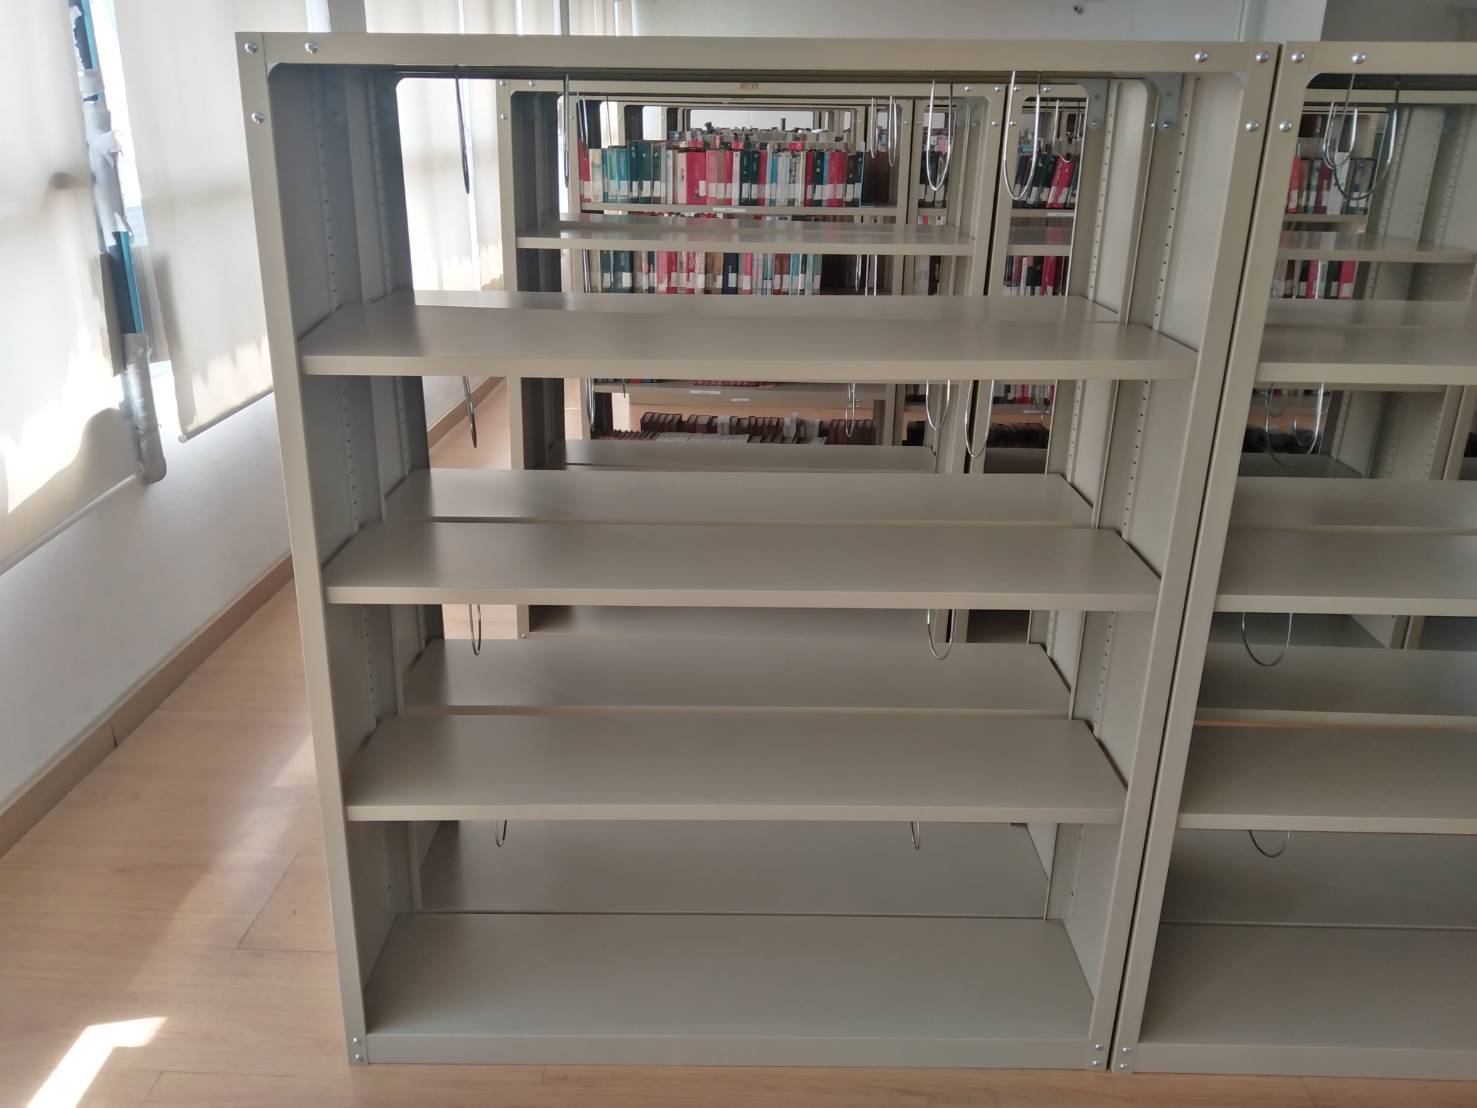 89031::S-504-S-204::A Lucky metal book shelves with adjustable shelves. Dimension (WxDxH) cm : 121.9x30.5x152.7/121.9x30.5x91.8  LUCKY Steel Book Shelves